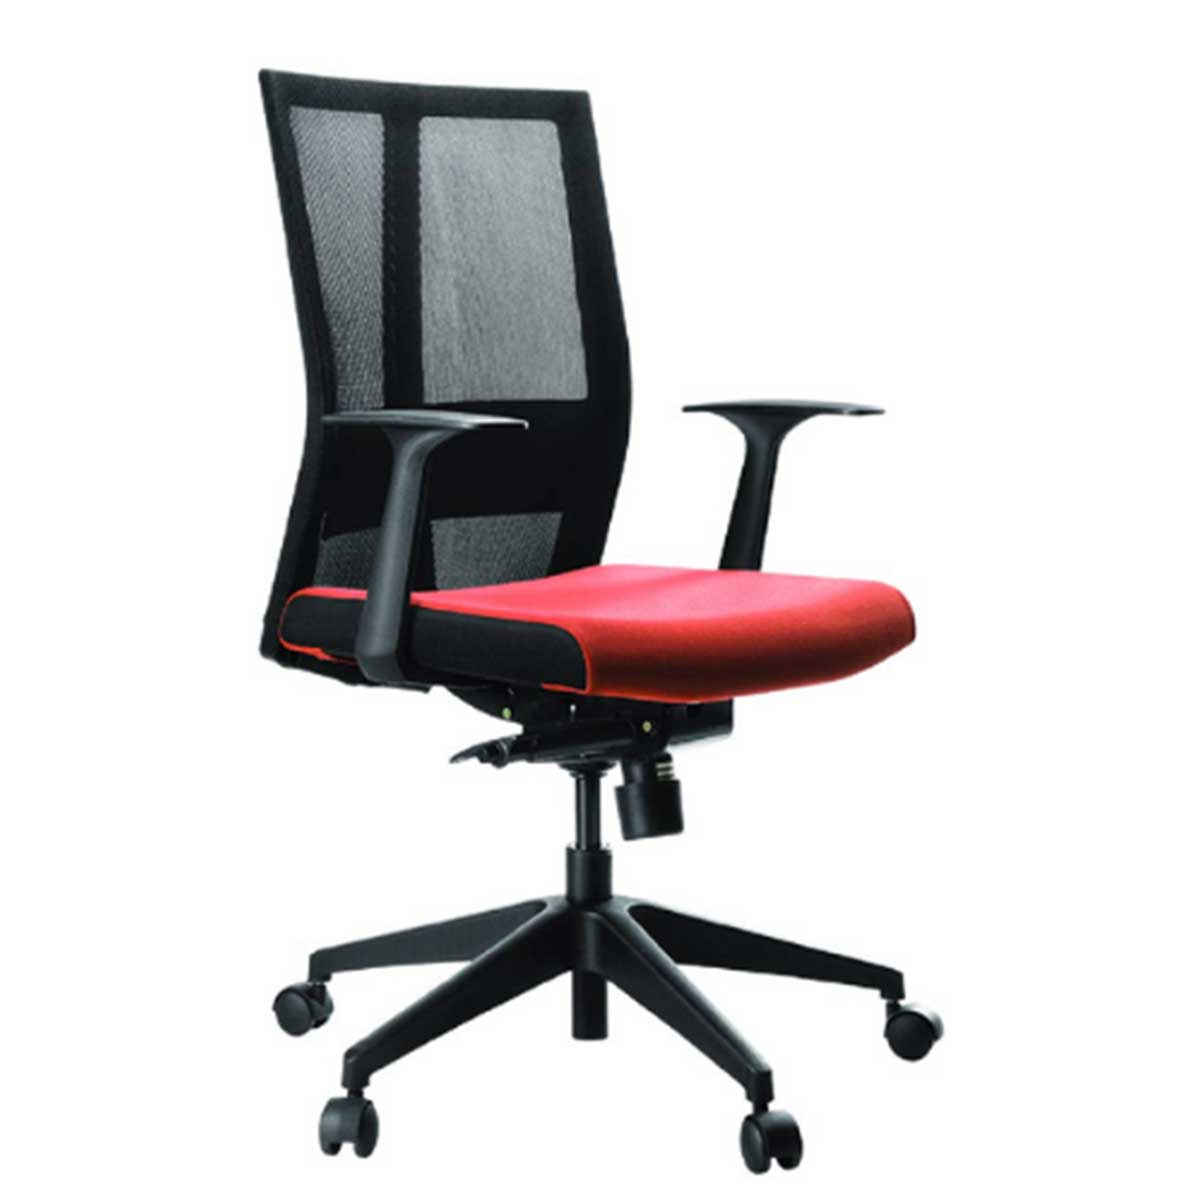 Conference Chair Manufacturers, Suppliers in Geeta Colony